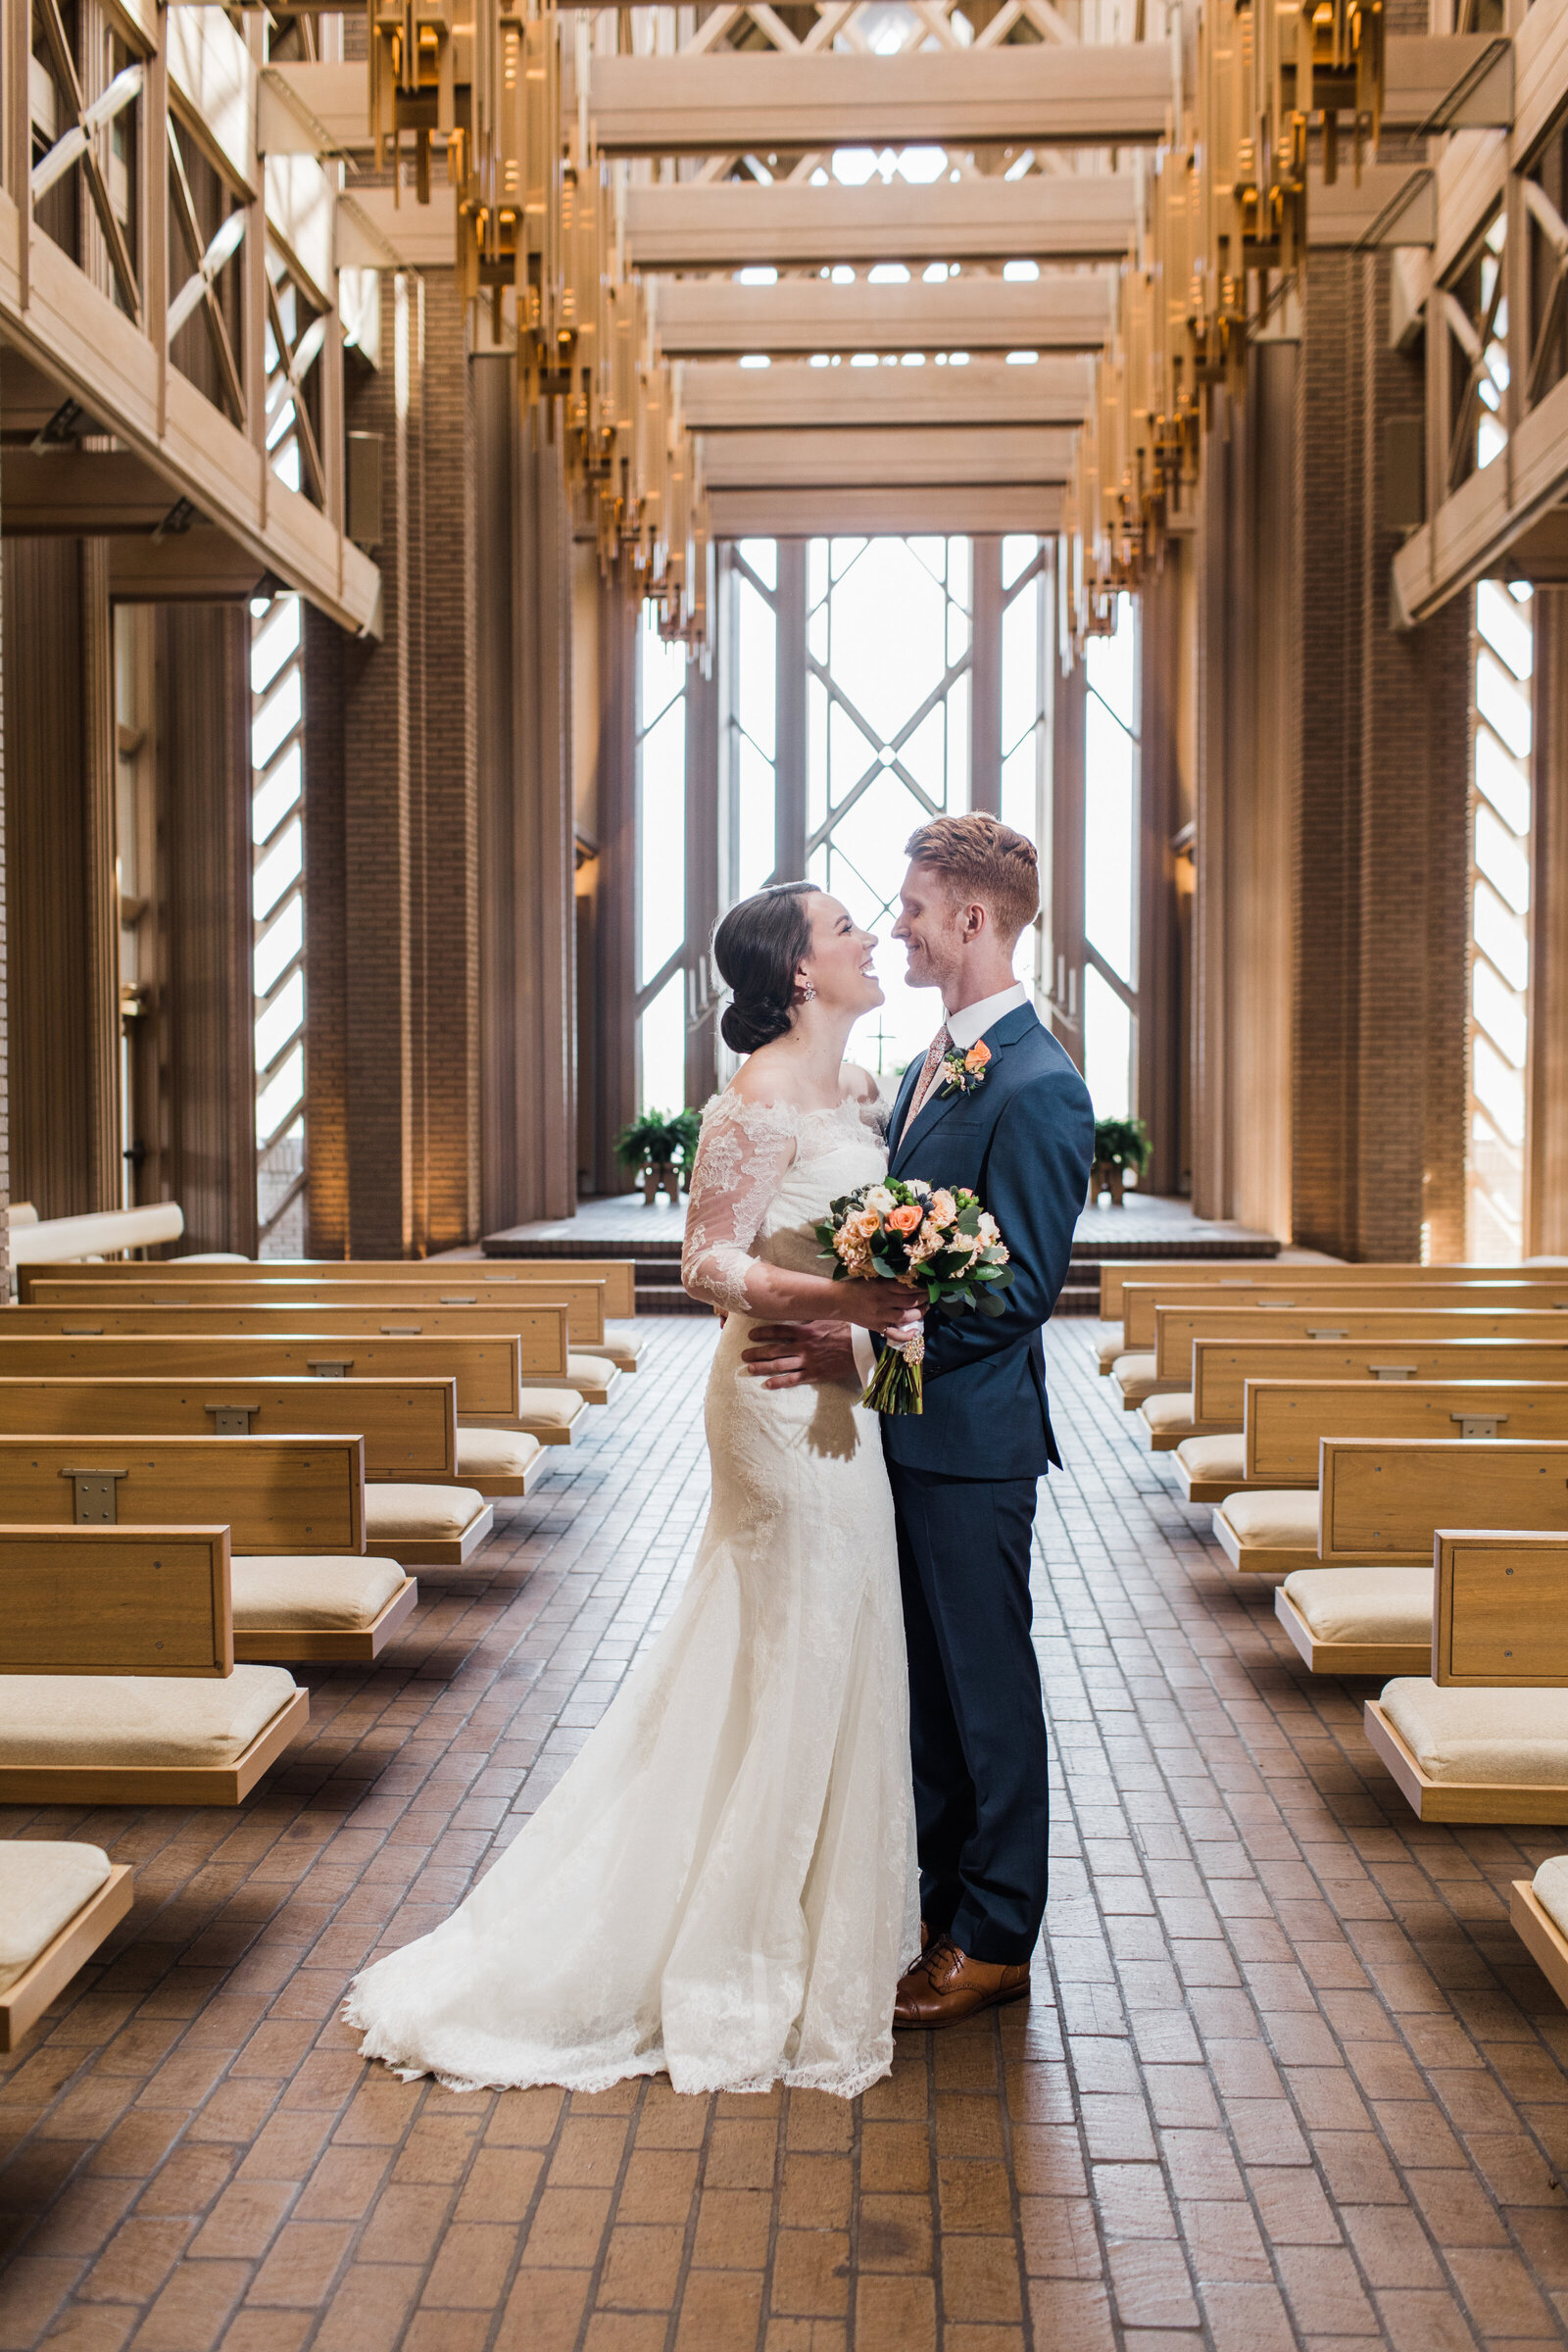 A bride and groom posing together in the main aisle of the Marty Leonard Chapel in Fort Worth, Texas. The bride is on the left and is wearing a long white floral dress and is holding a bouquet. The groom is on the right and is wearing a blue suit with brown dress shoes. They are facing each other and holding each other close together.